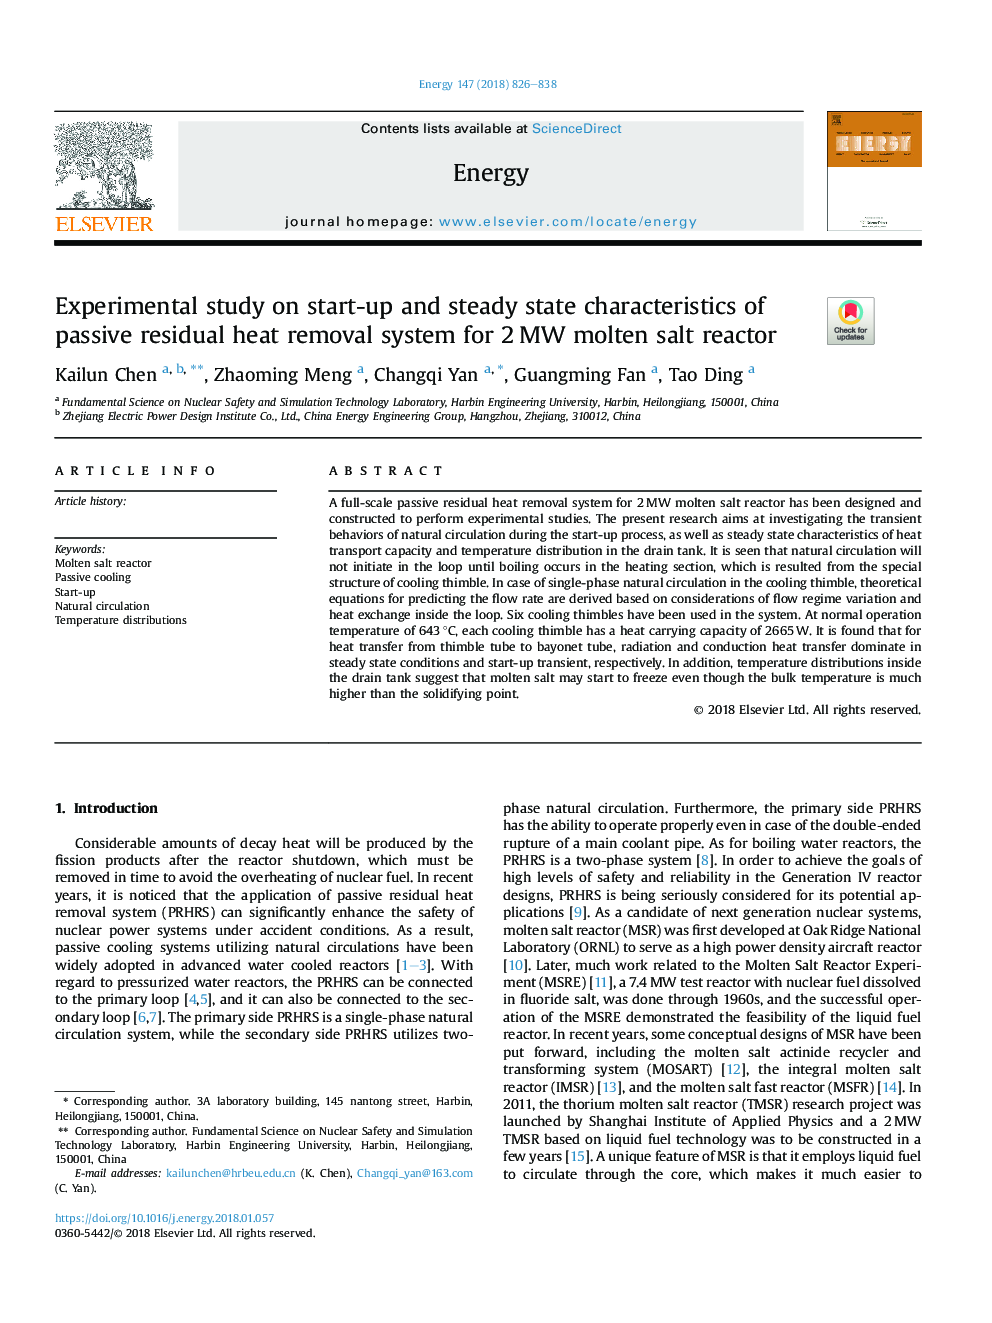 Experimental study on start-up and steady state characteristics of passive residual heat removal system for 2â¯MW molten salt reactor